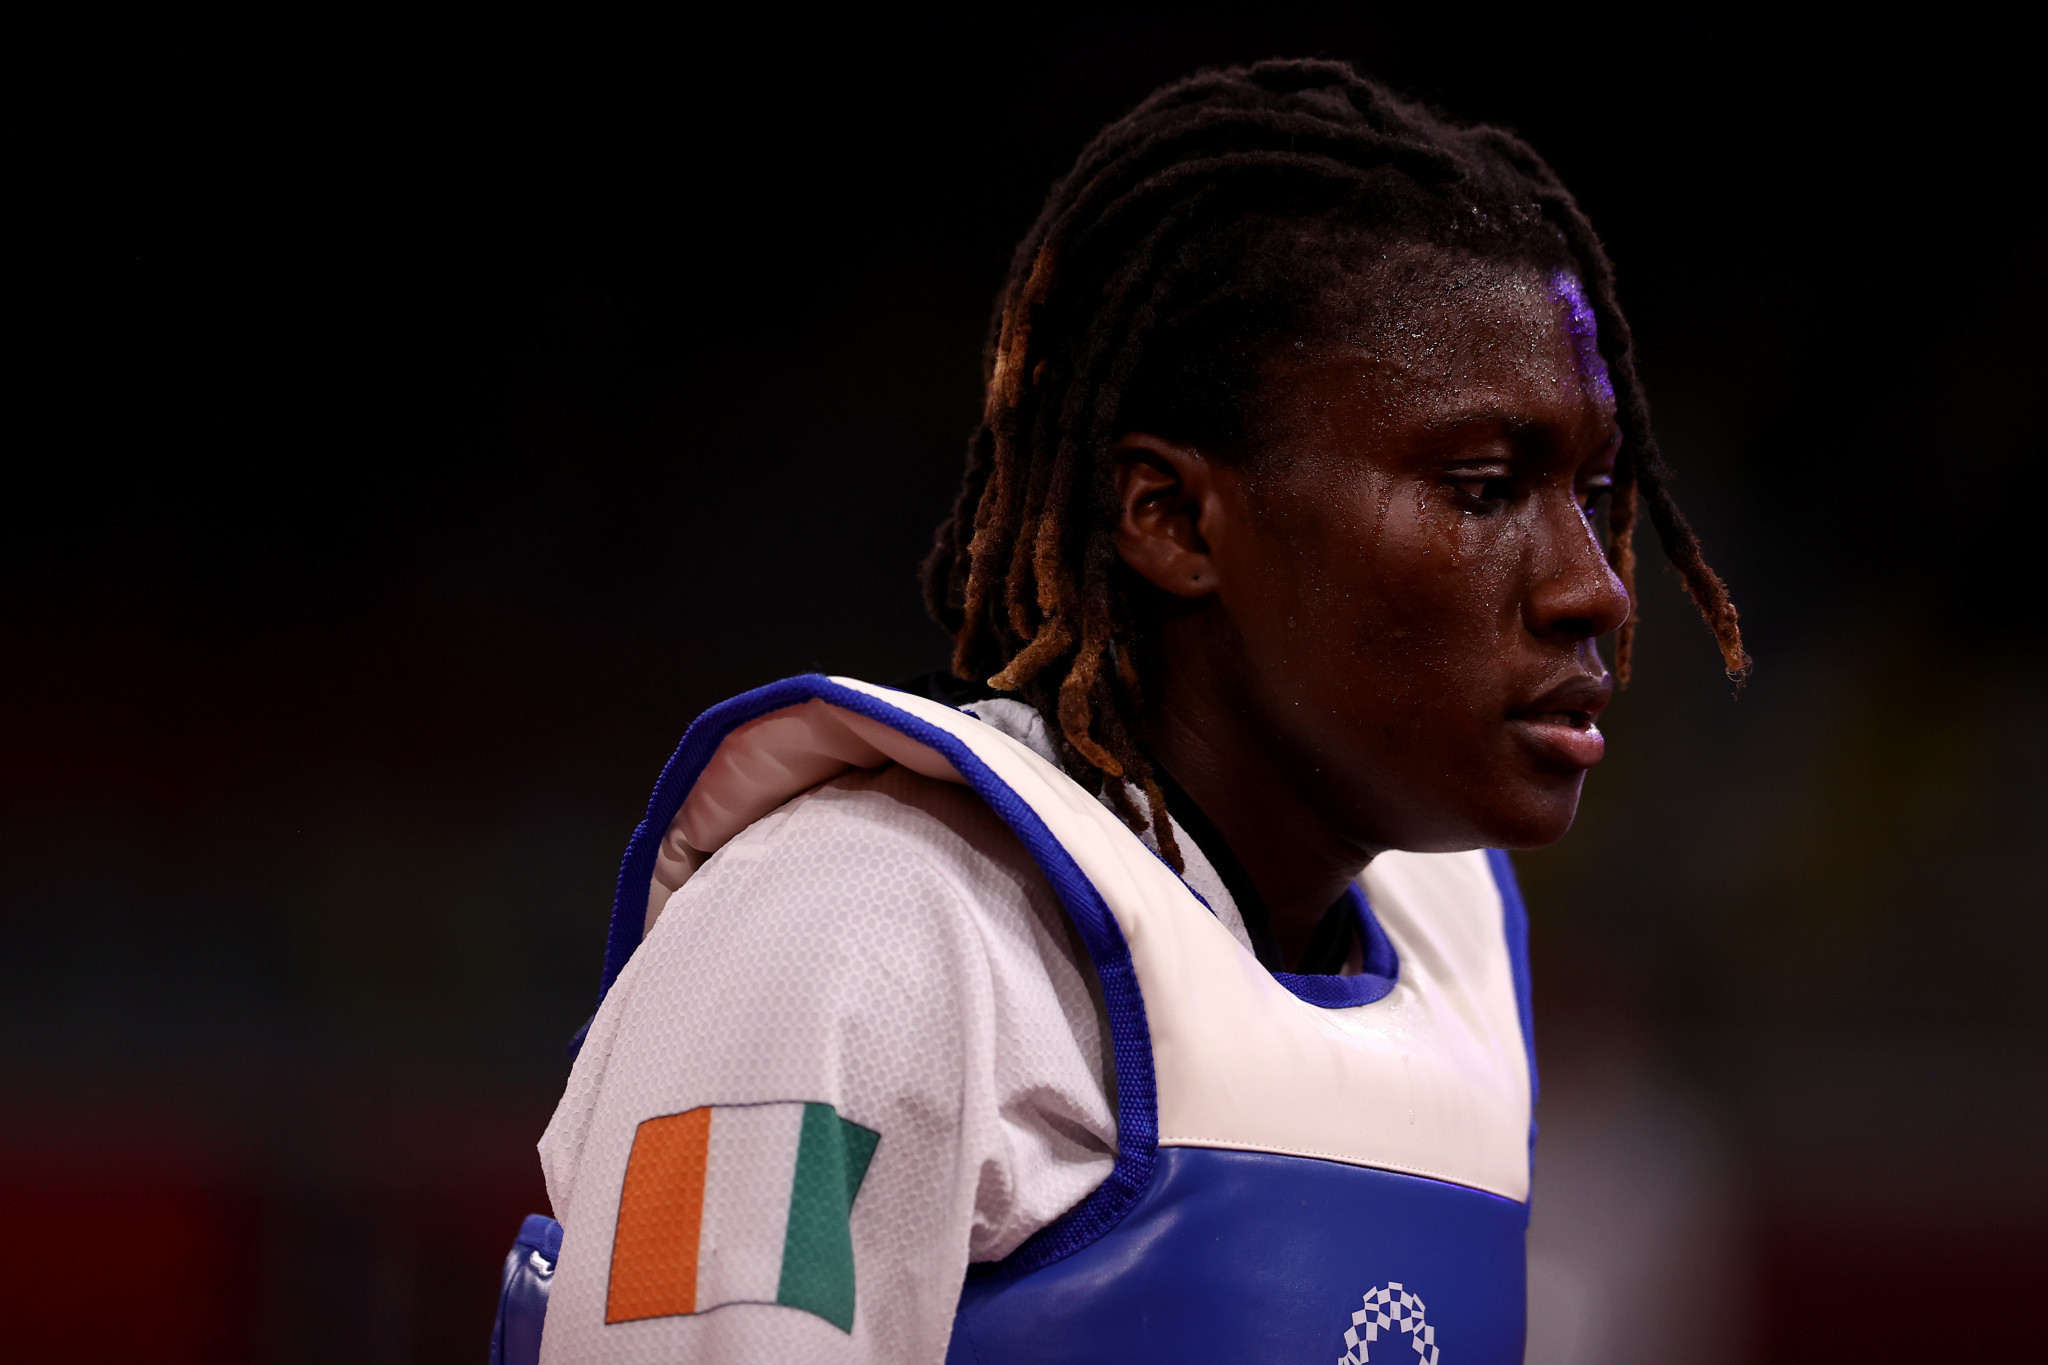 Ruth Gbagbi has enjoyed success for the Ivory Coast, winning the world title and Olympic medals ©Getty Images